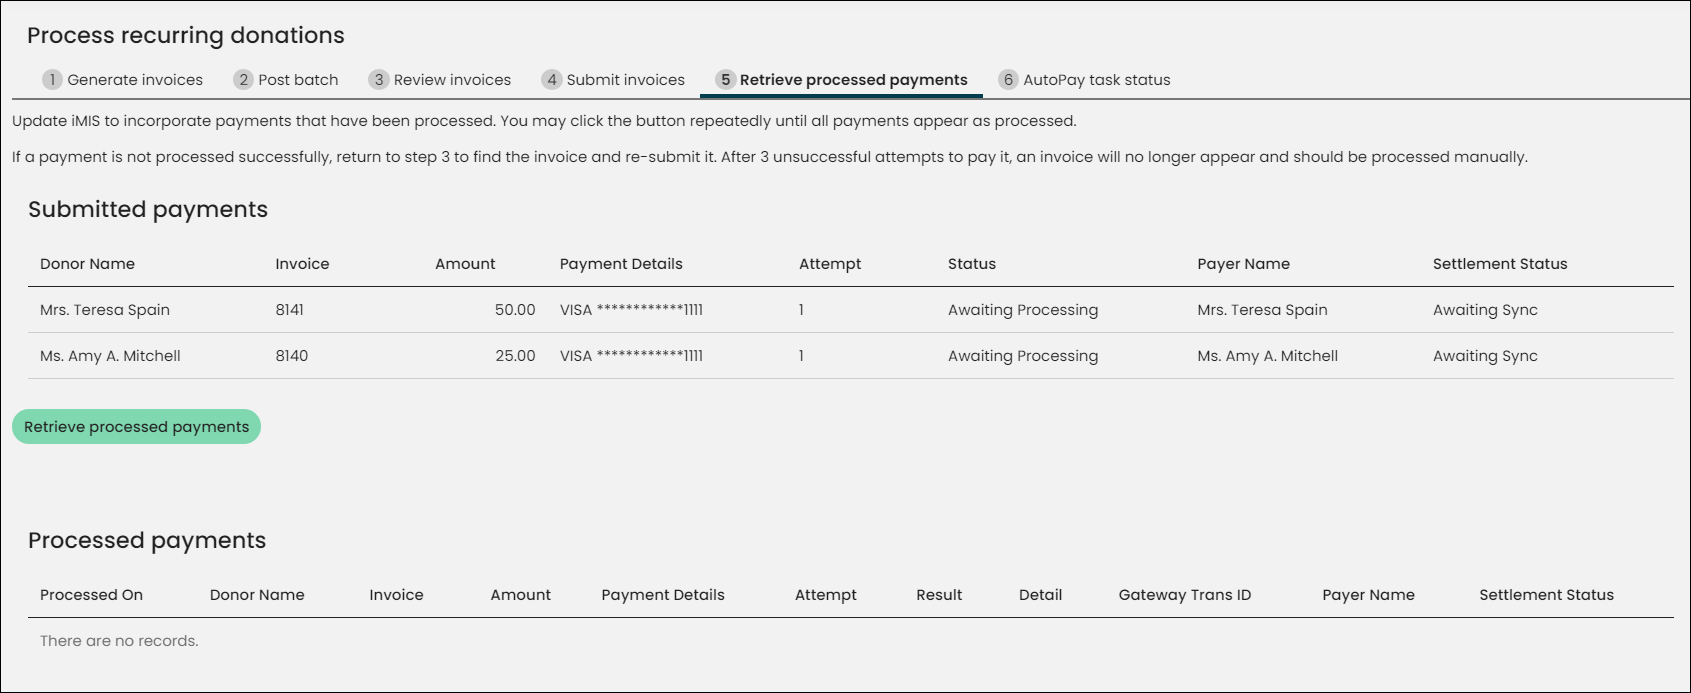 Retrieving process payments for autopay